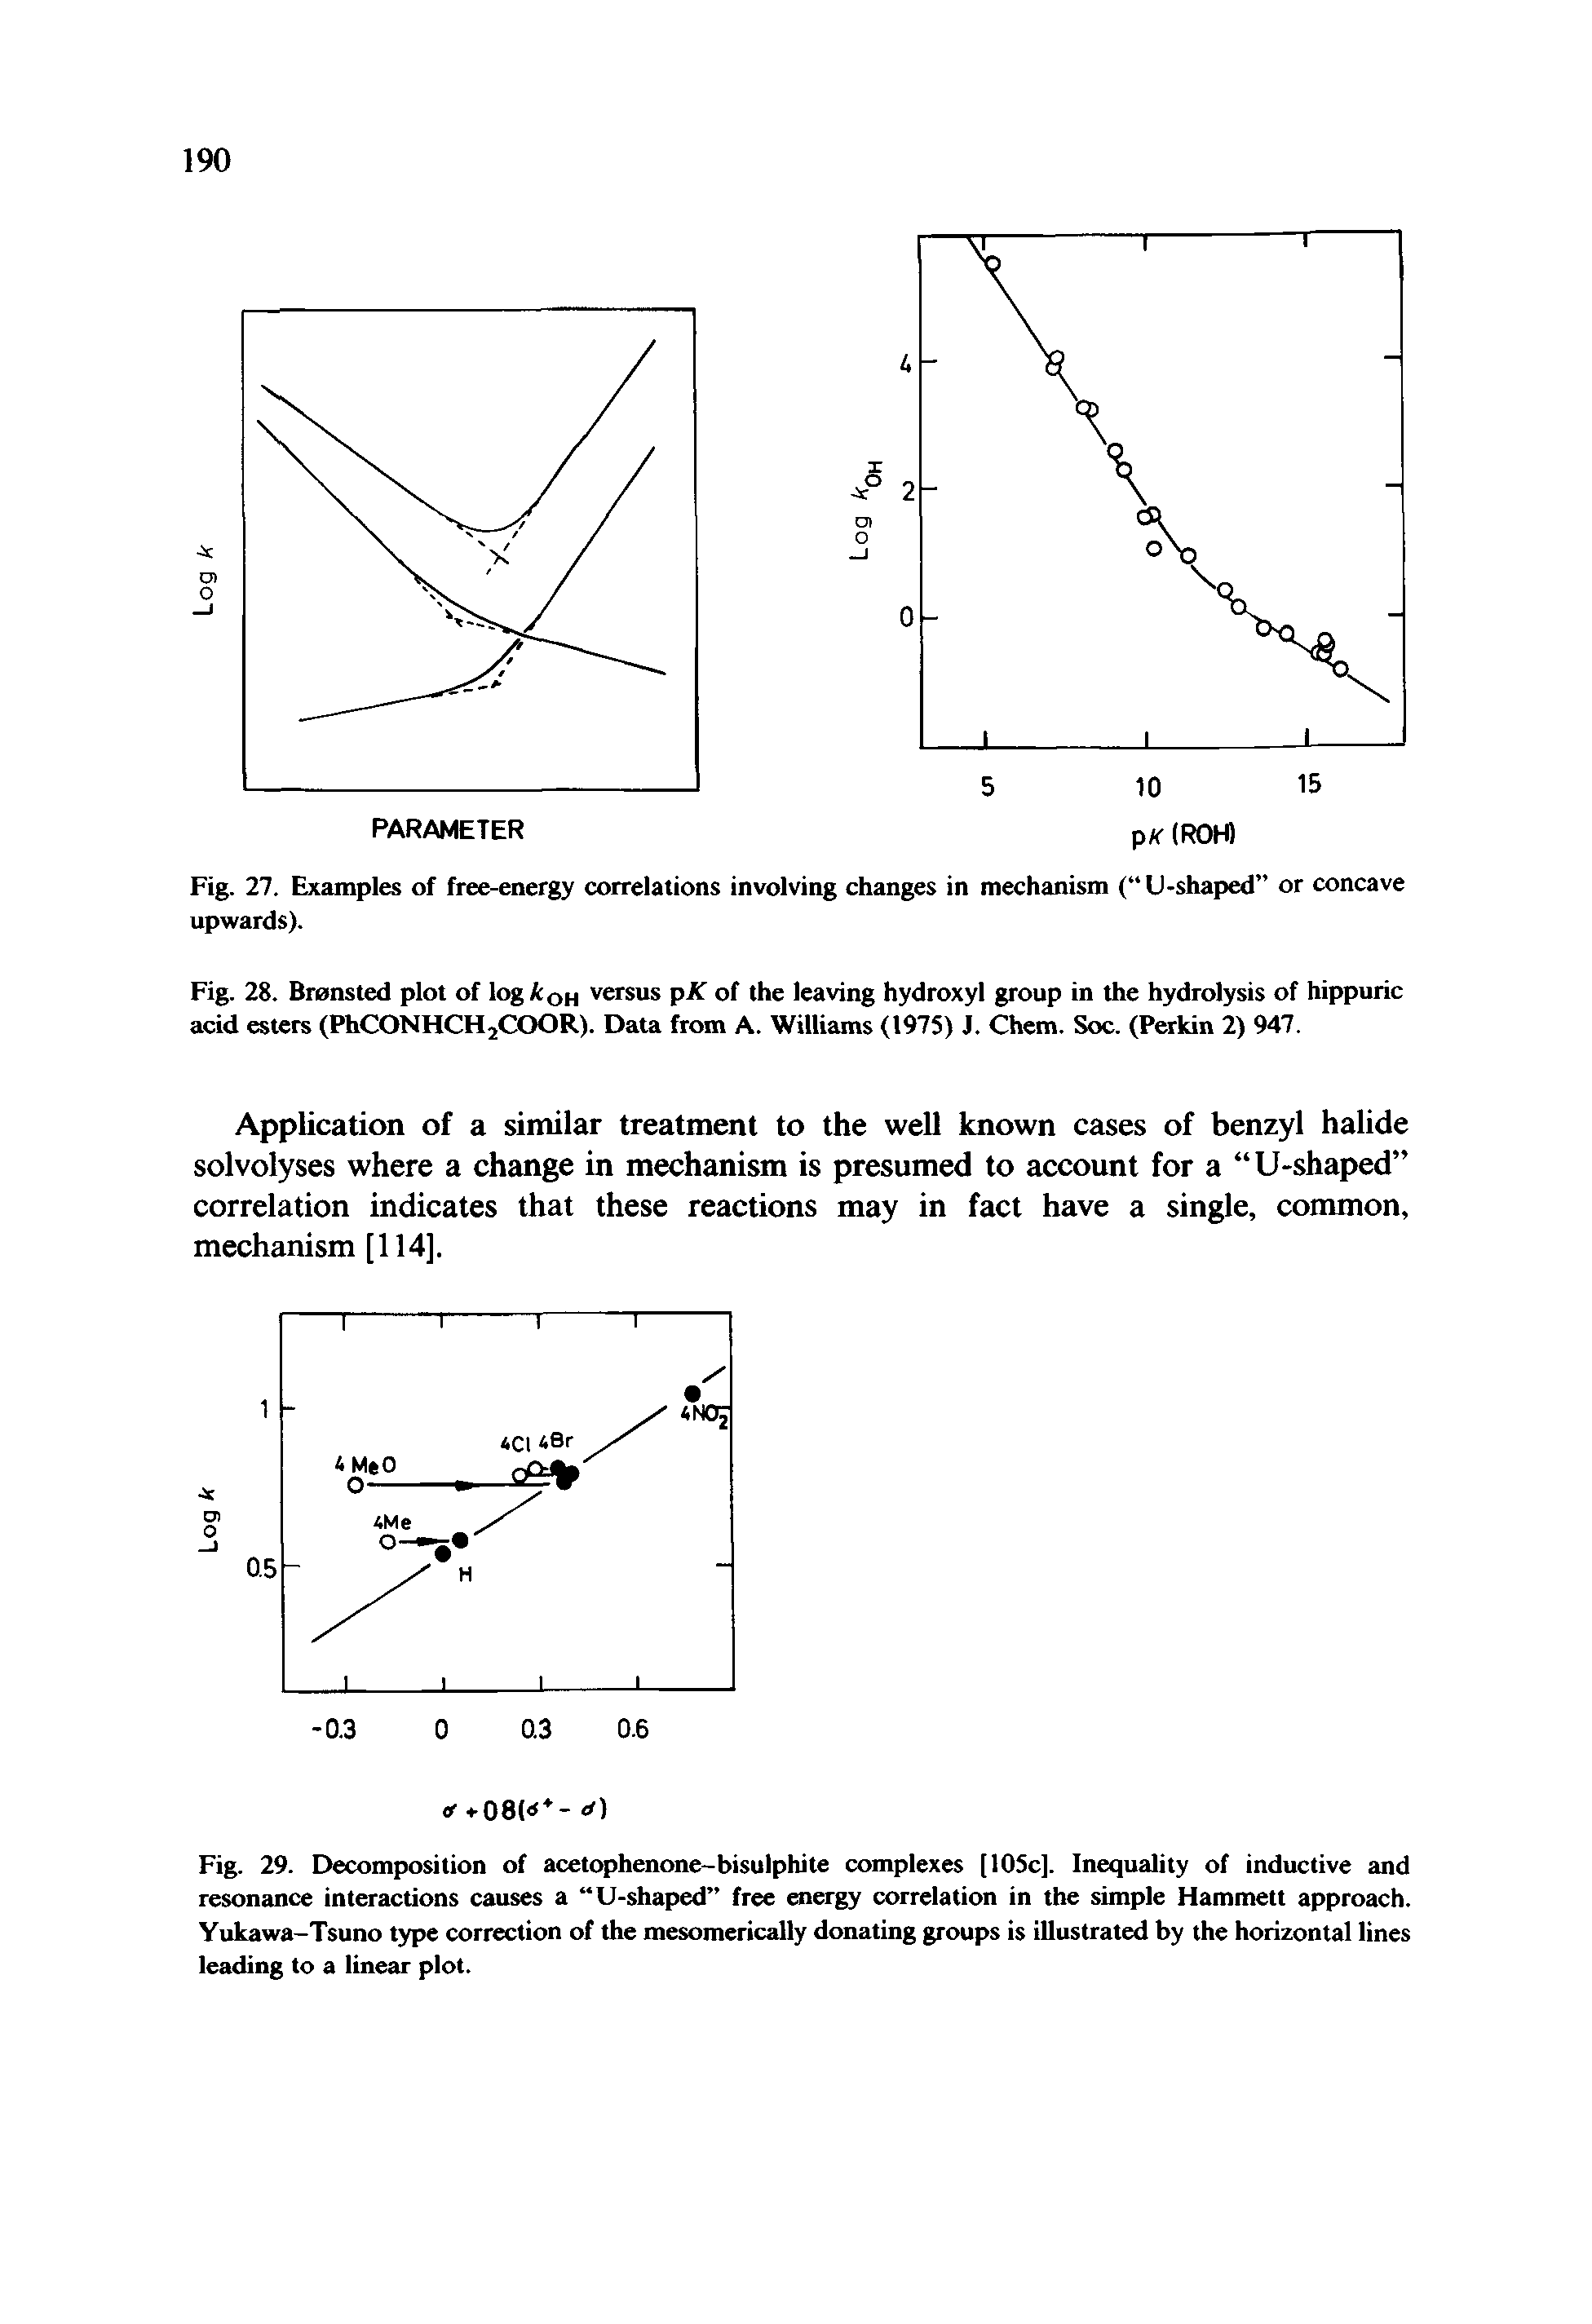 Fig. 29. Decomposition of acetophenone-bisulphite complexes [105c]. Inequality of inductive and resonance interactions causes a U-shaped free energy correlation in the simple Hammett approach. Yukawa-Tsuno type correction of the mesomerically donating groups is illustrated by the horizontal lines leading to a linear plot.